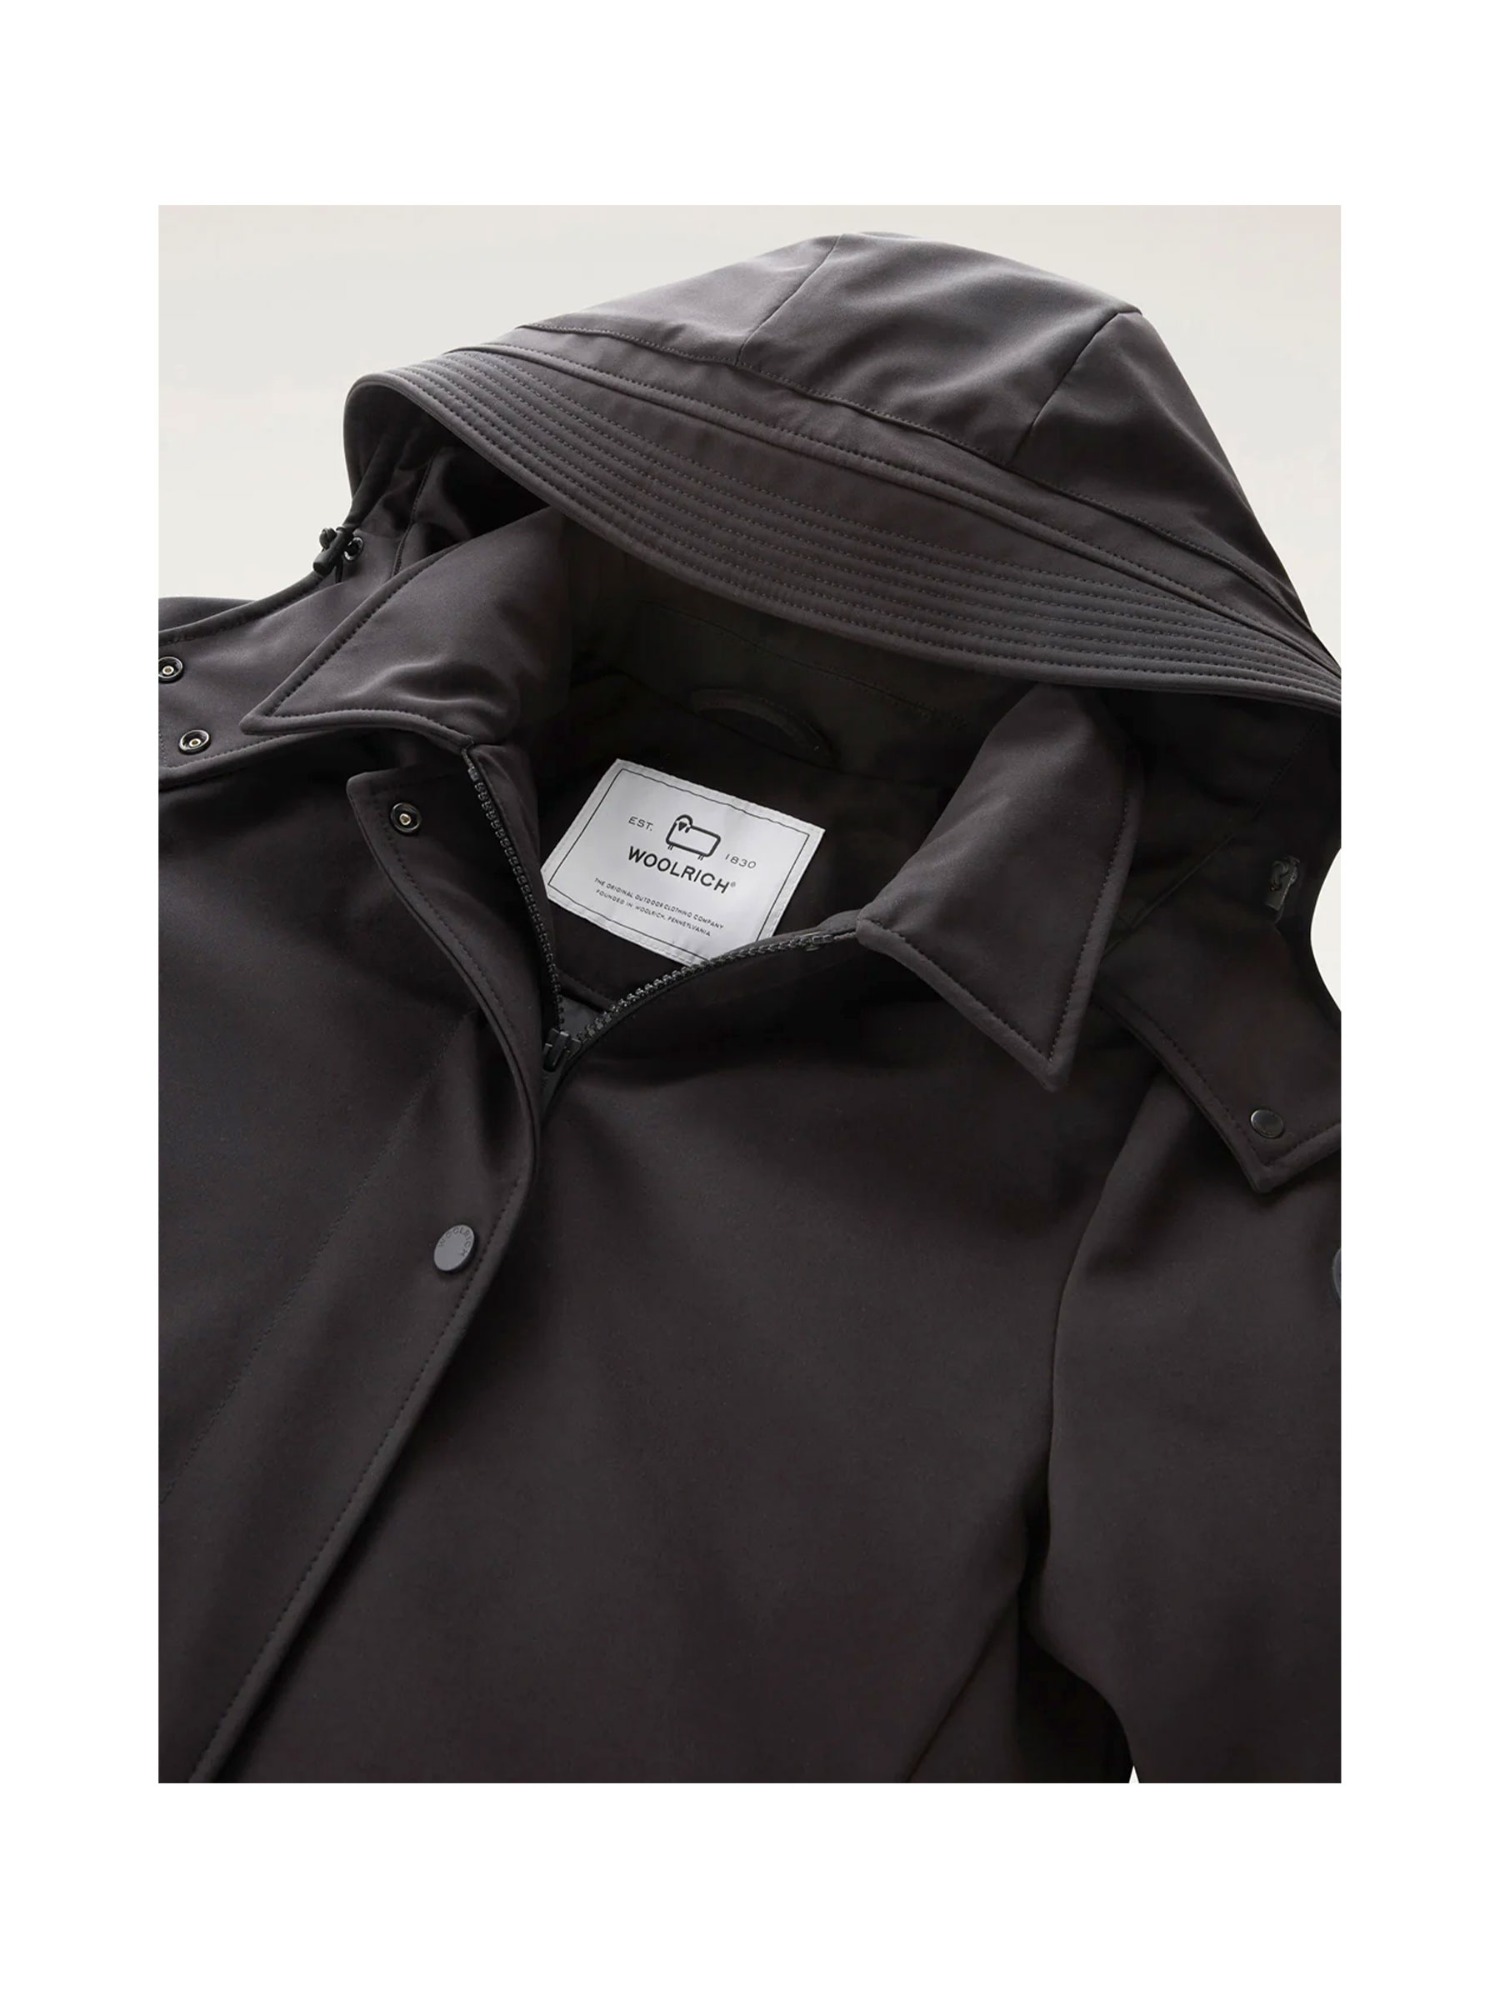 WOOLRICH FIRTH DOWN HOODED TRENCH